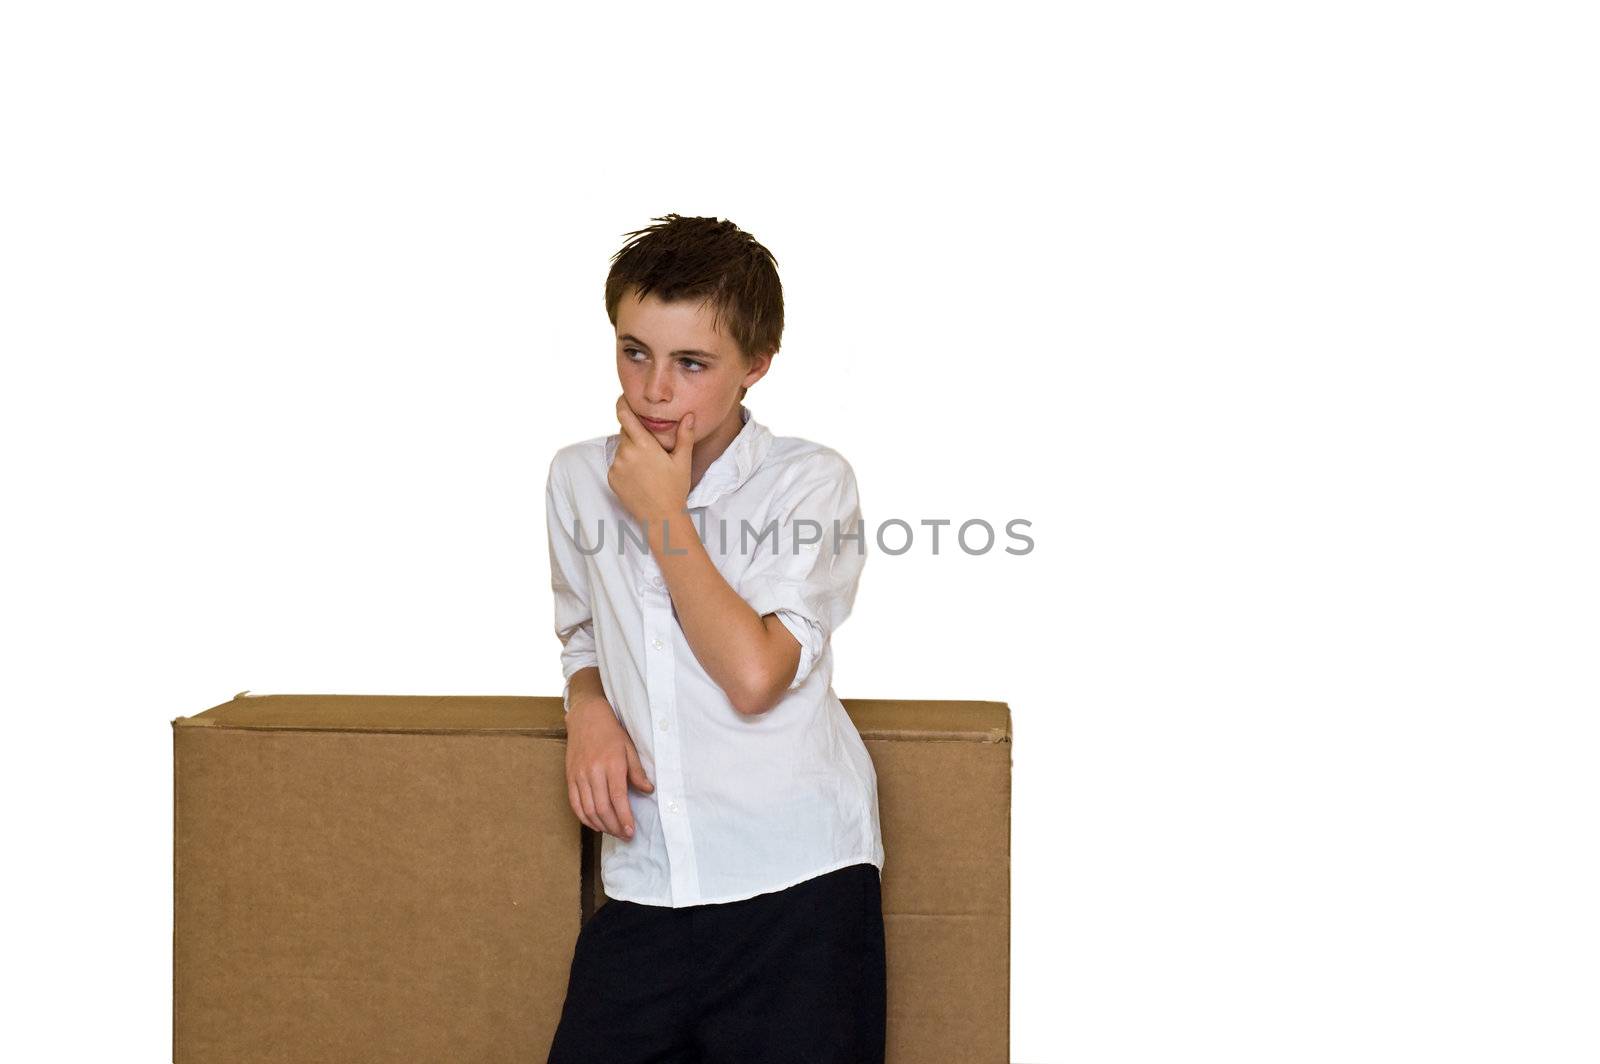 an image of a disheveled young teen stood thinking outside a large cardboard box, depicting the common phrase "thinking outside of the box" isolated for ease of use.